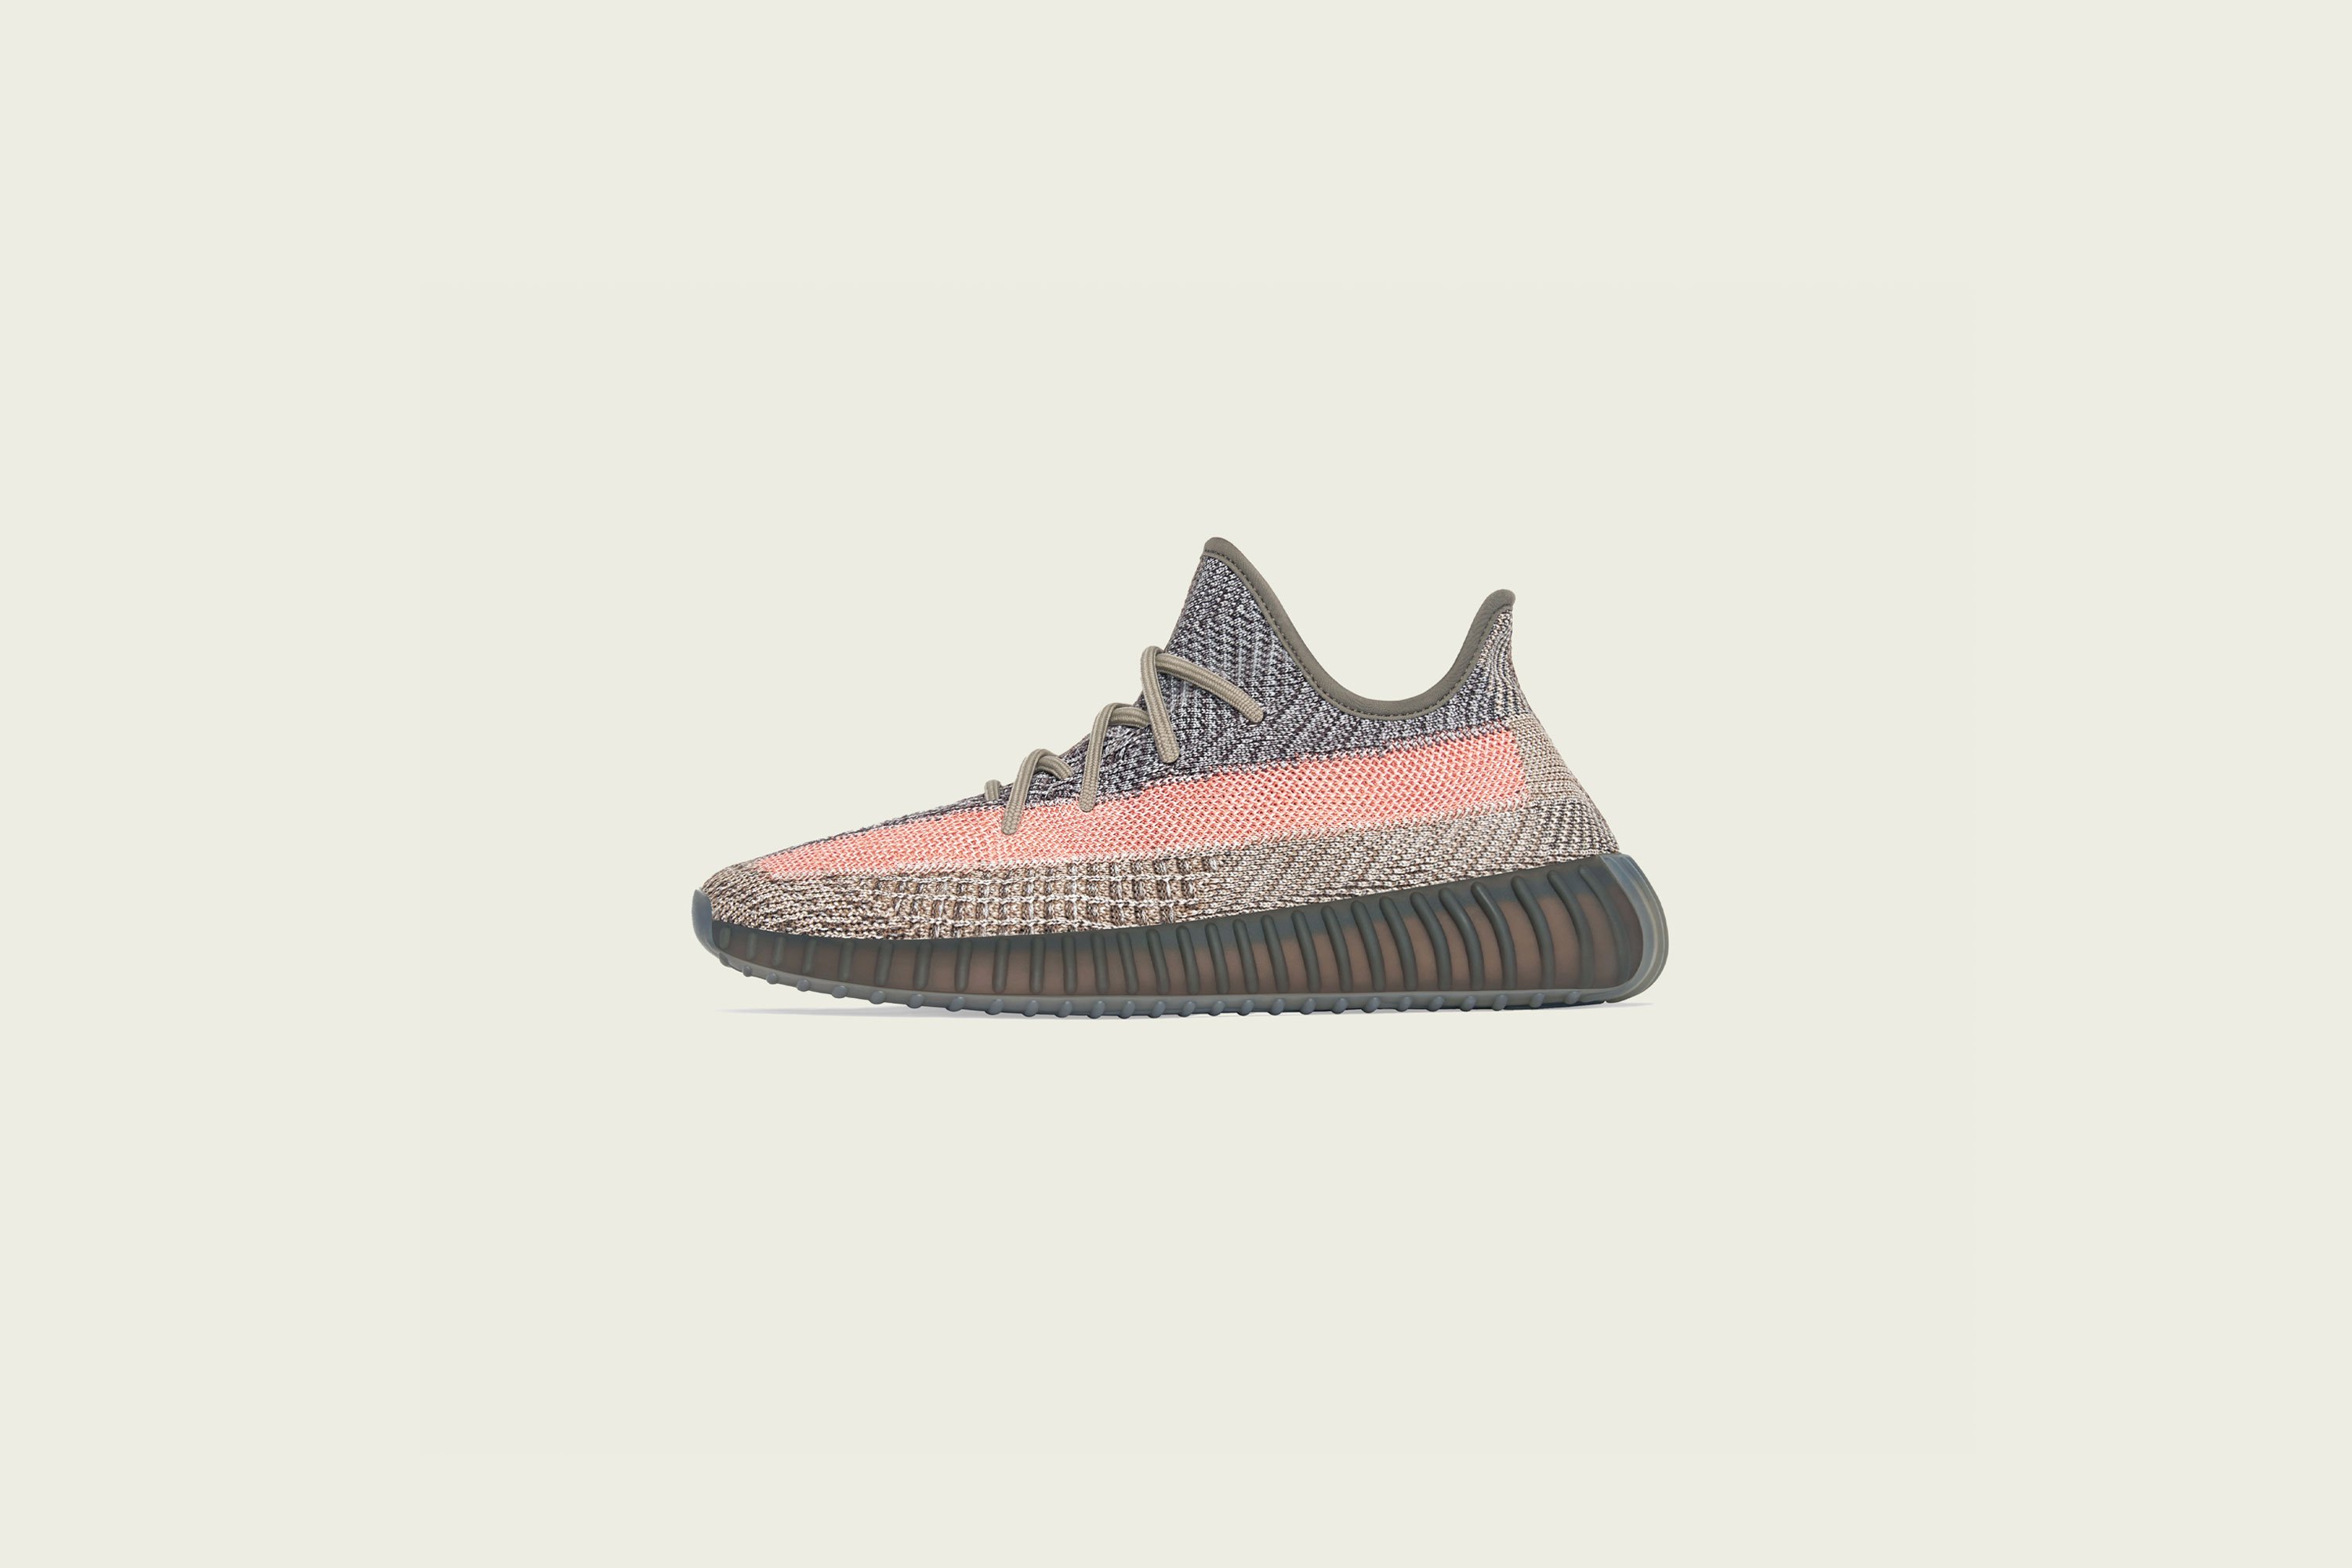 Up There Launches - adidas Originals Yeezy Boost 350V2 'Ash Stone'